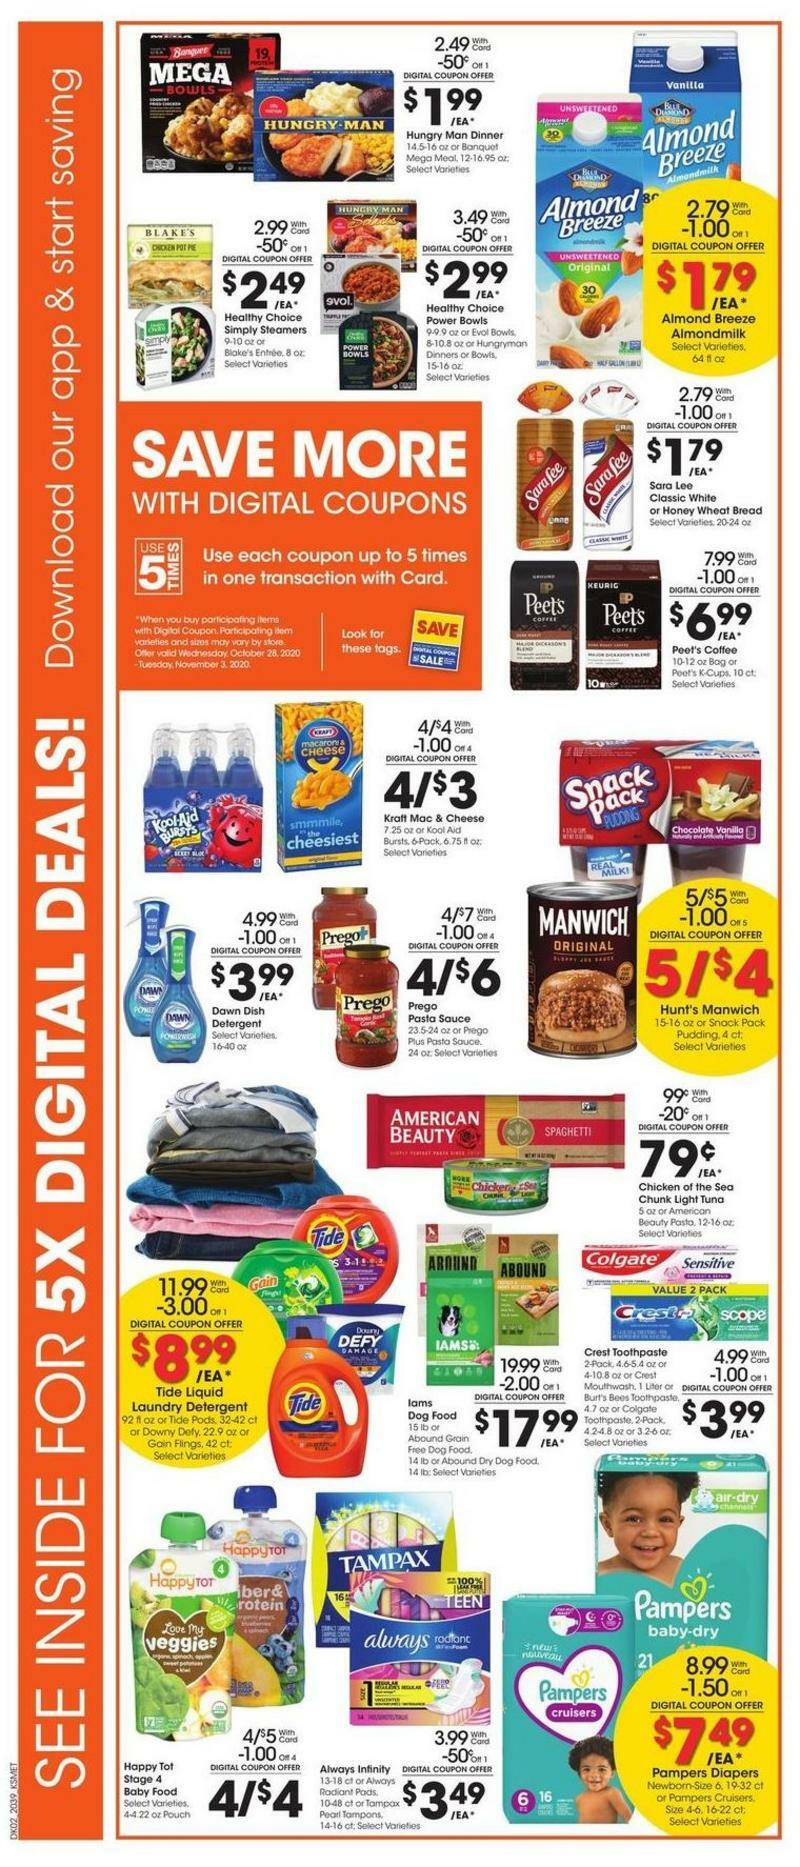 City Market Weekly Ad from October 28